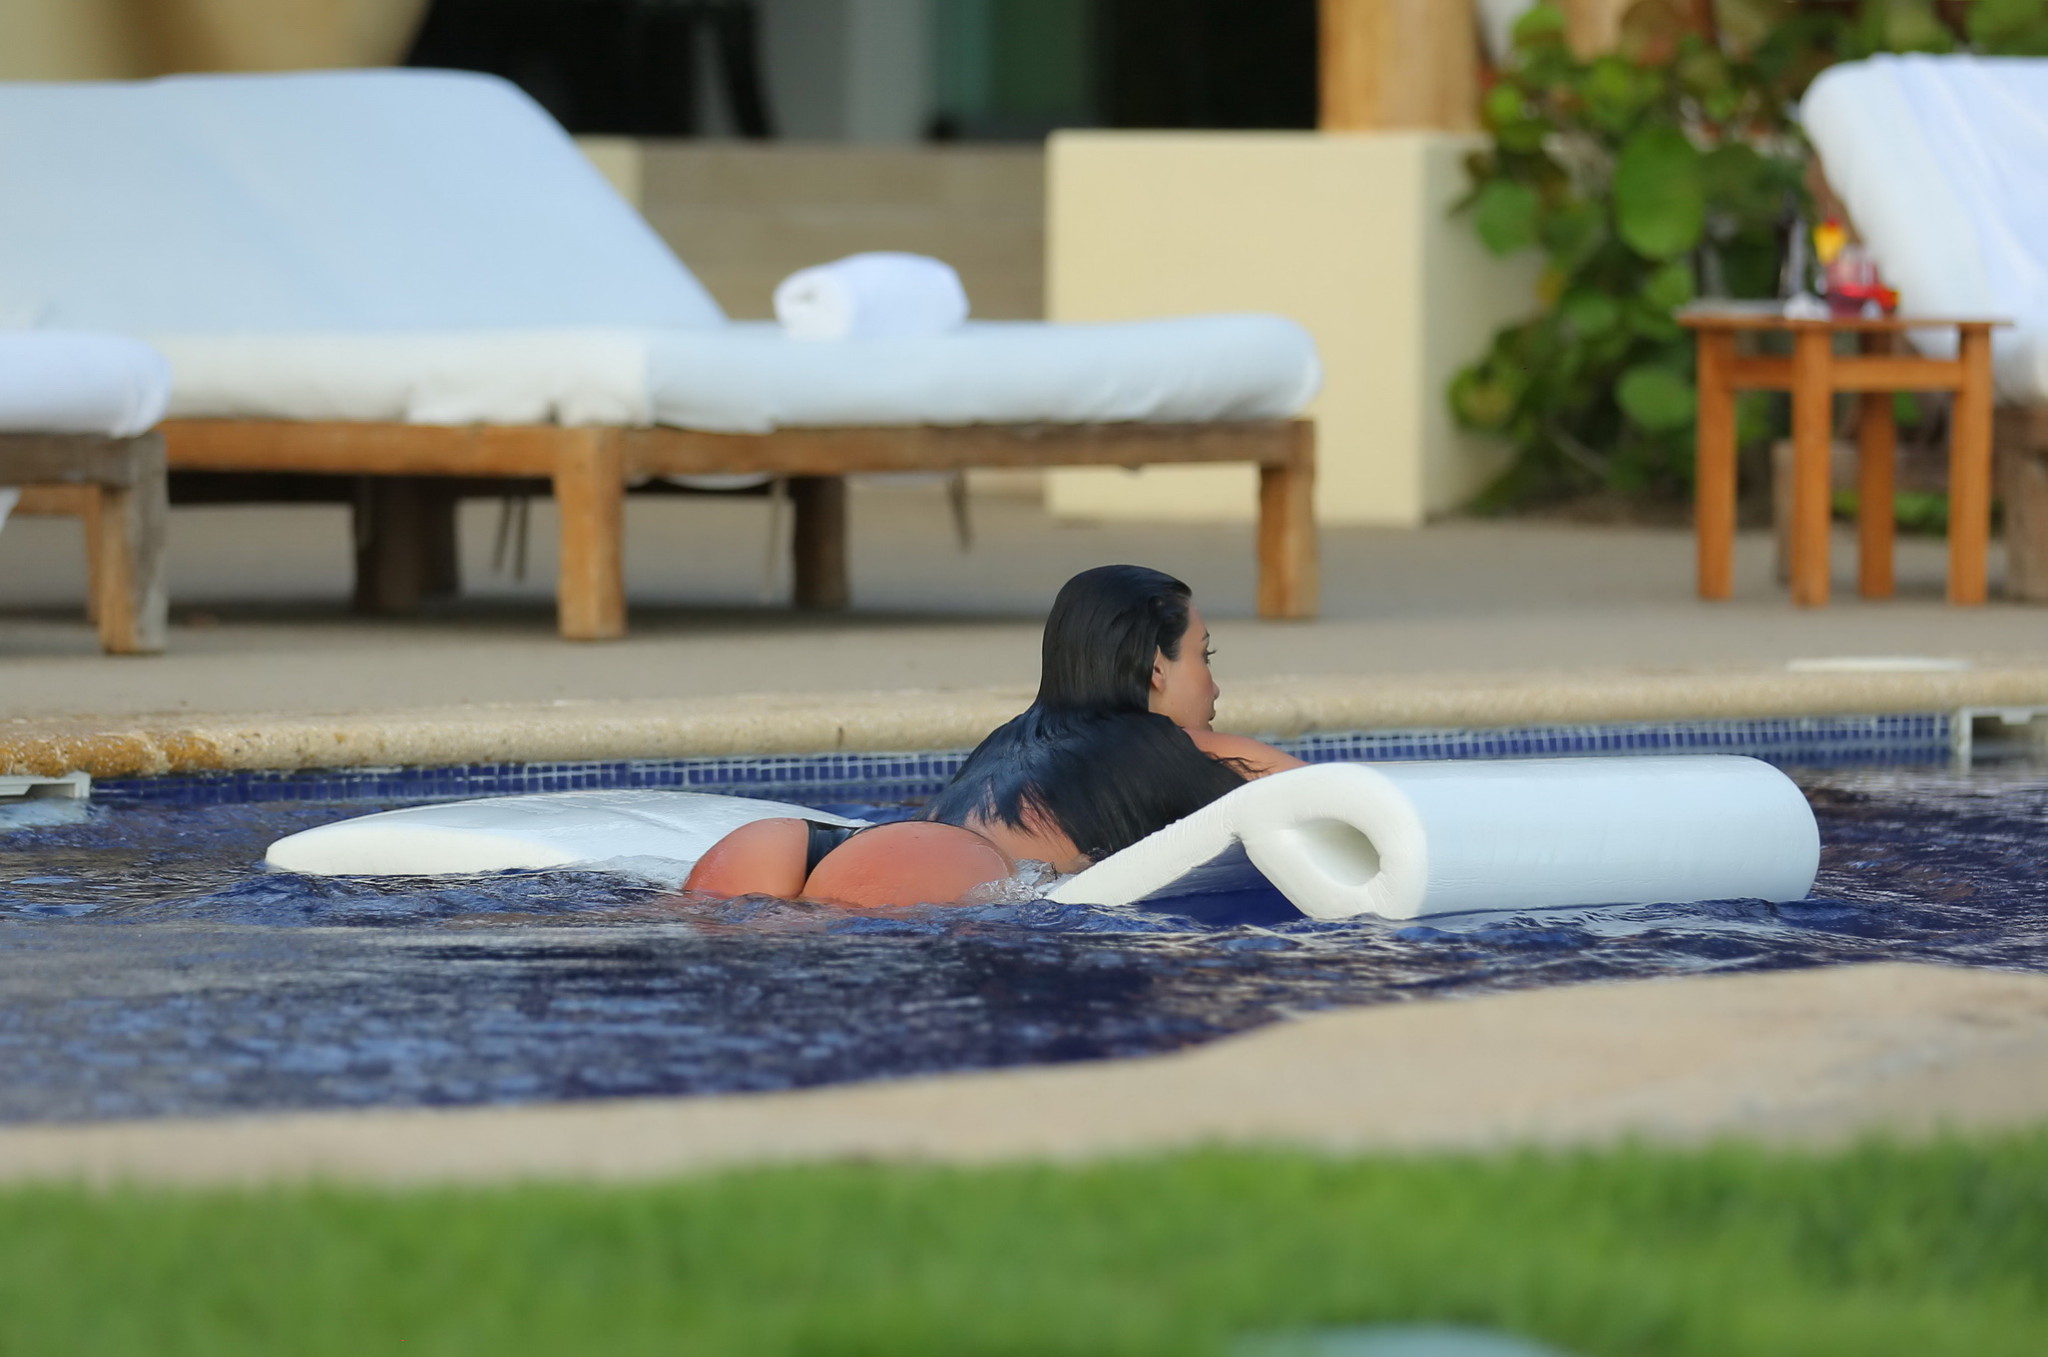 Kim Kardashian shows off her huge boobs in a wet seethru top poolside in Mexico #75193601